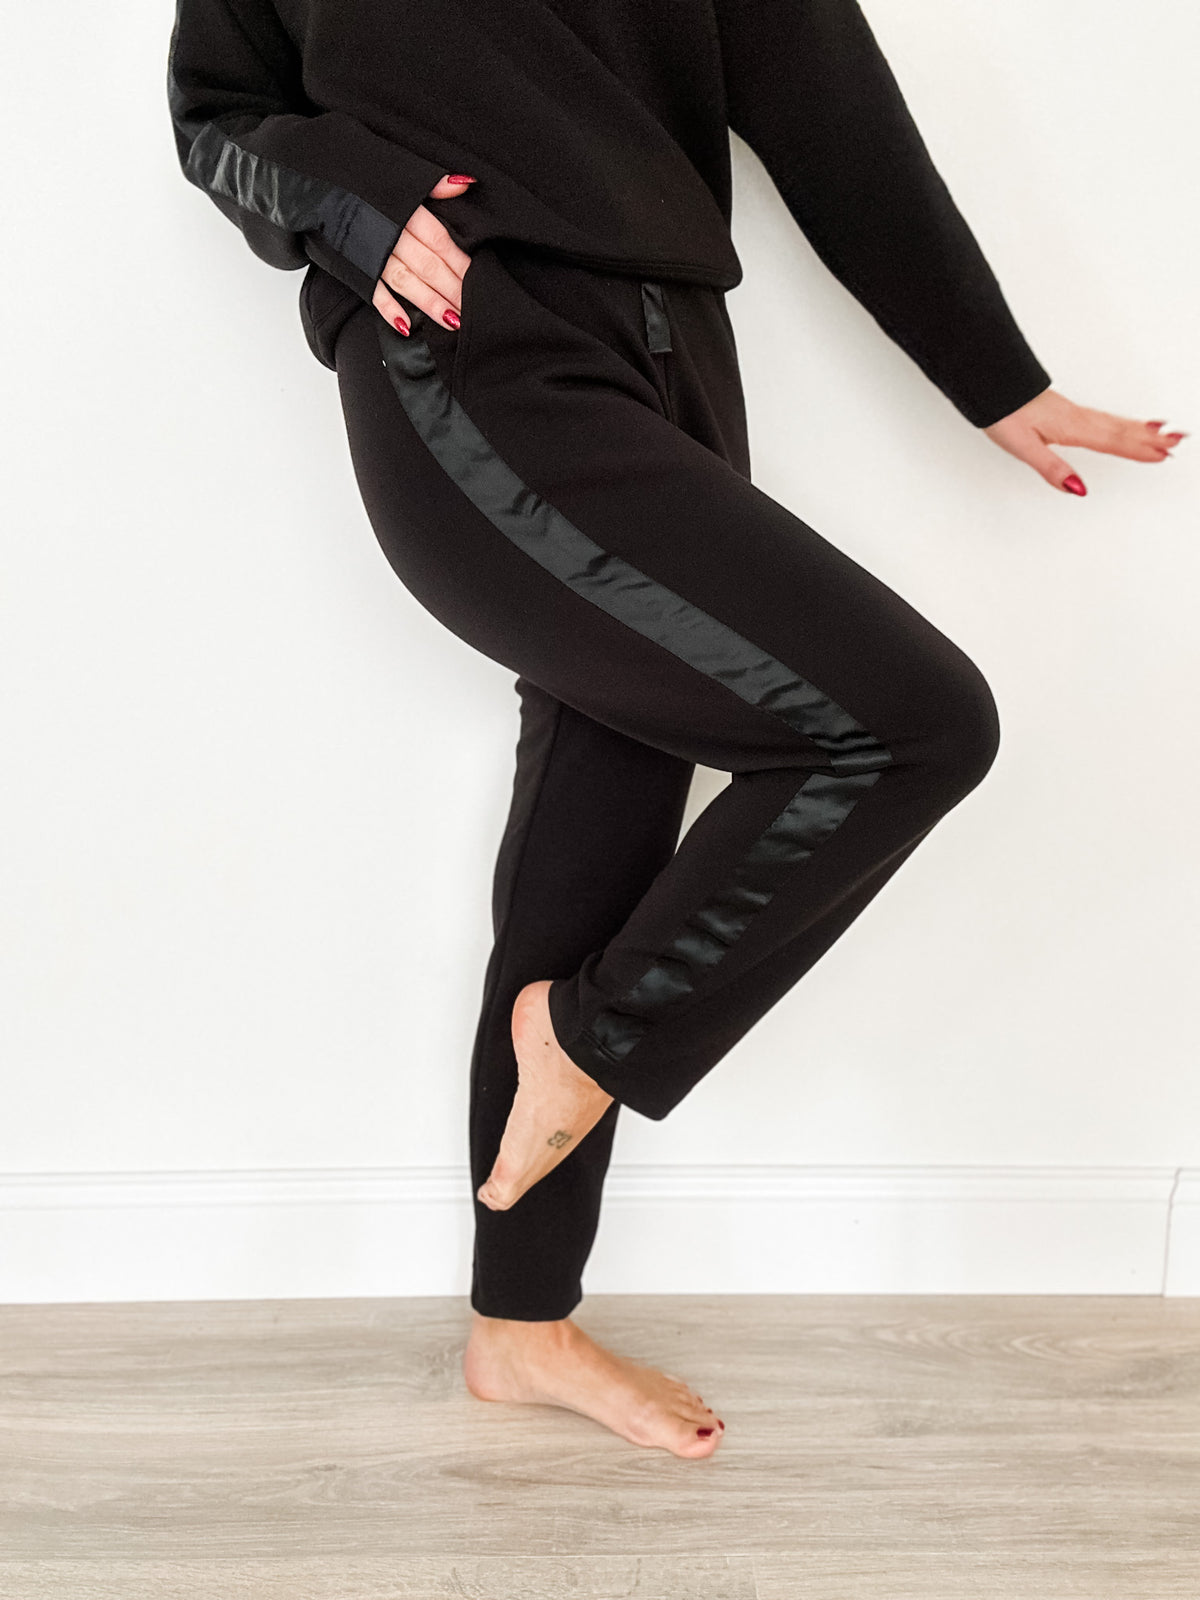 Brushed Butter Soft Leggings – Striped Box Boutique